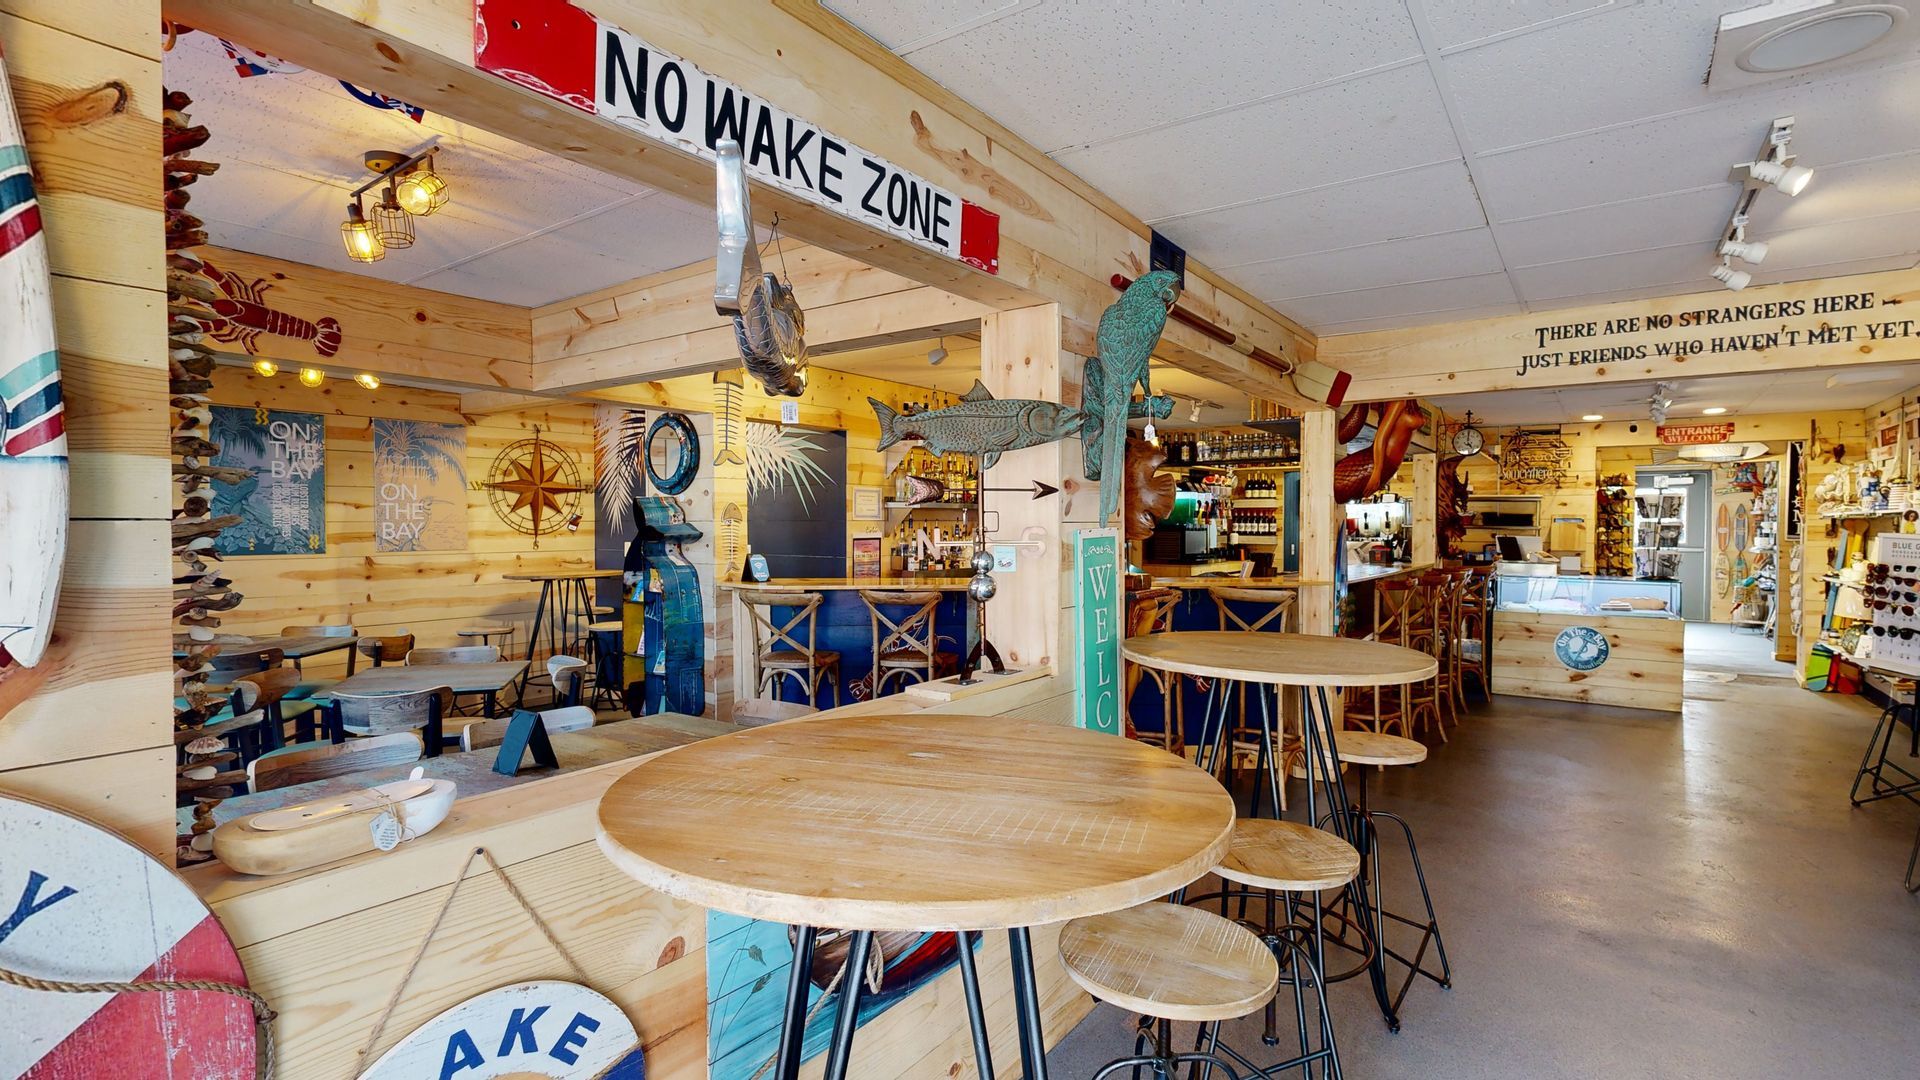 At On The Bay restaurant with indoor dining, tiki bar and a nautical boater boutique with a sign that says No Wake Zone.